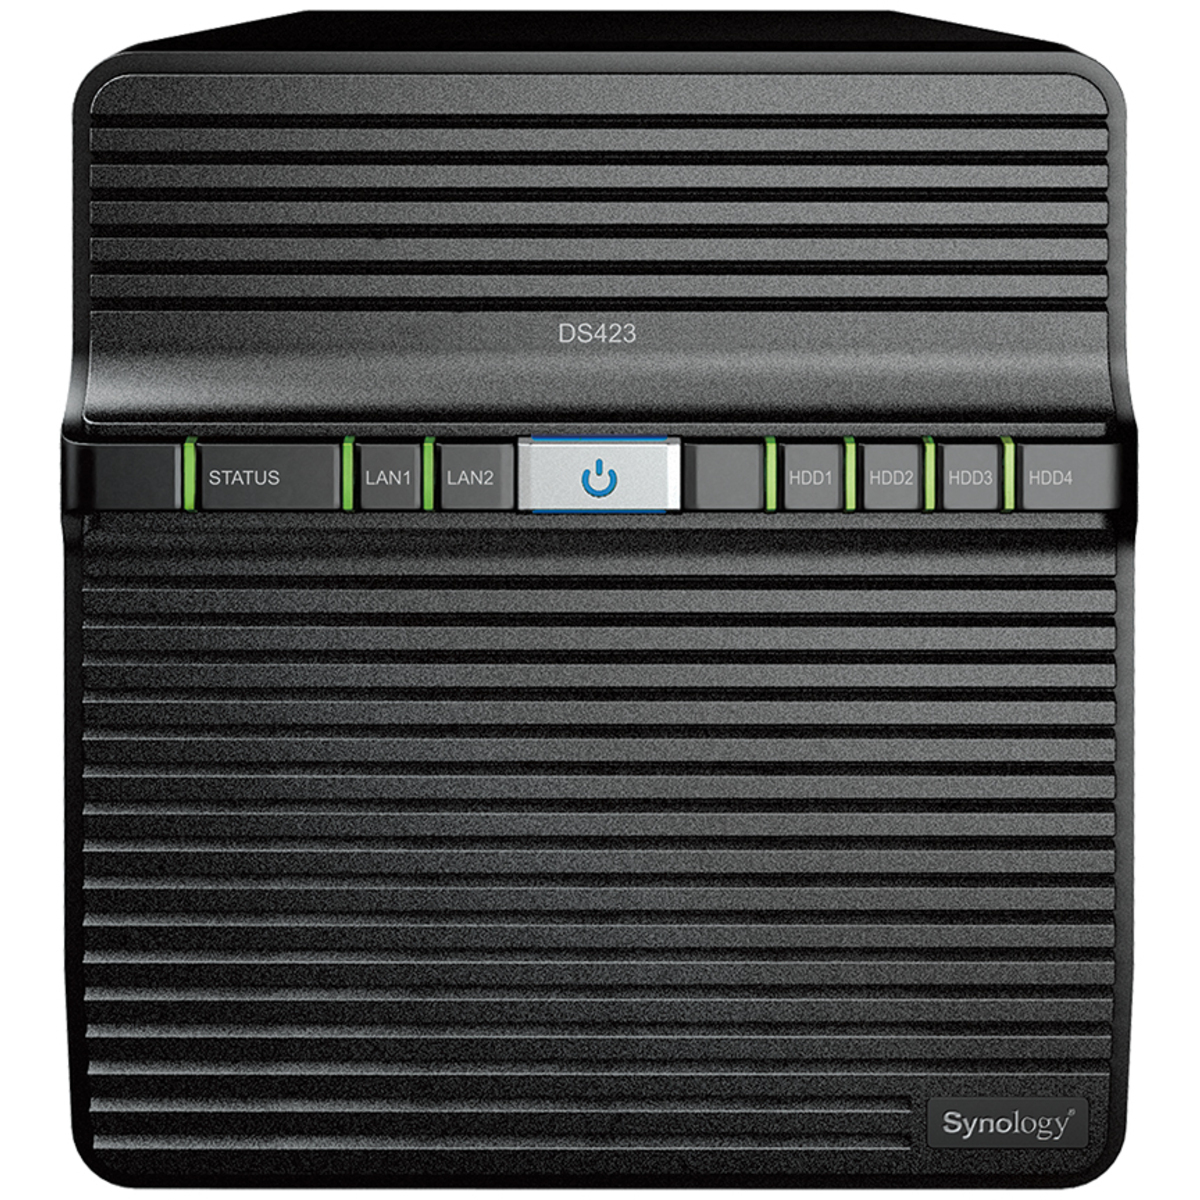 Synology DiskStation DS423 8tb 4-Bay Desktop Personal / Basic Home / Small Office NAS - Network Attached Storage Device 4x2tb Sandisk Ultra 3D SDSSDH3-2T00 2.5 560/520MB/s SATA 6Gb/s SSD CONSUMER Class Drives Installed - Burn-In Tested DiskStation DS423